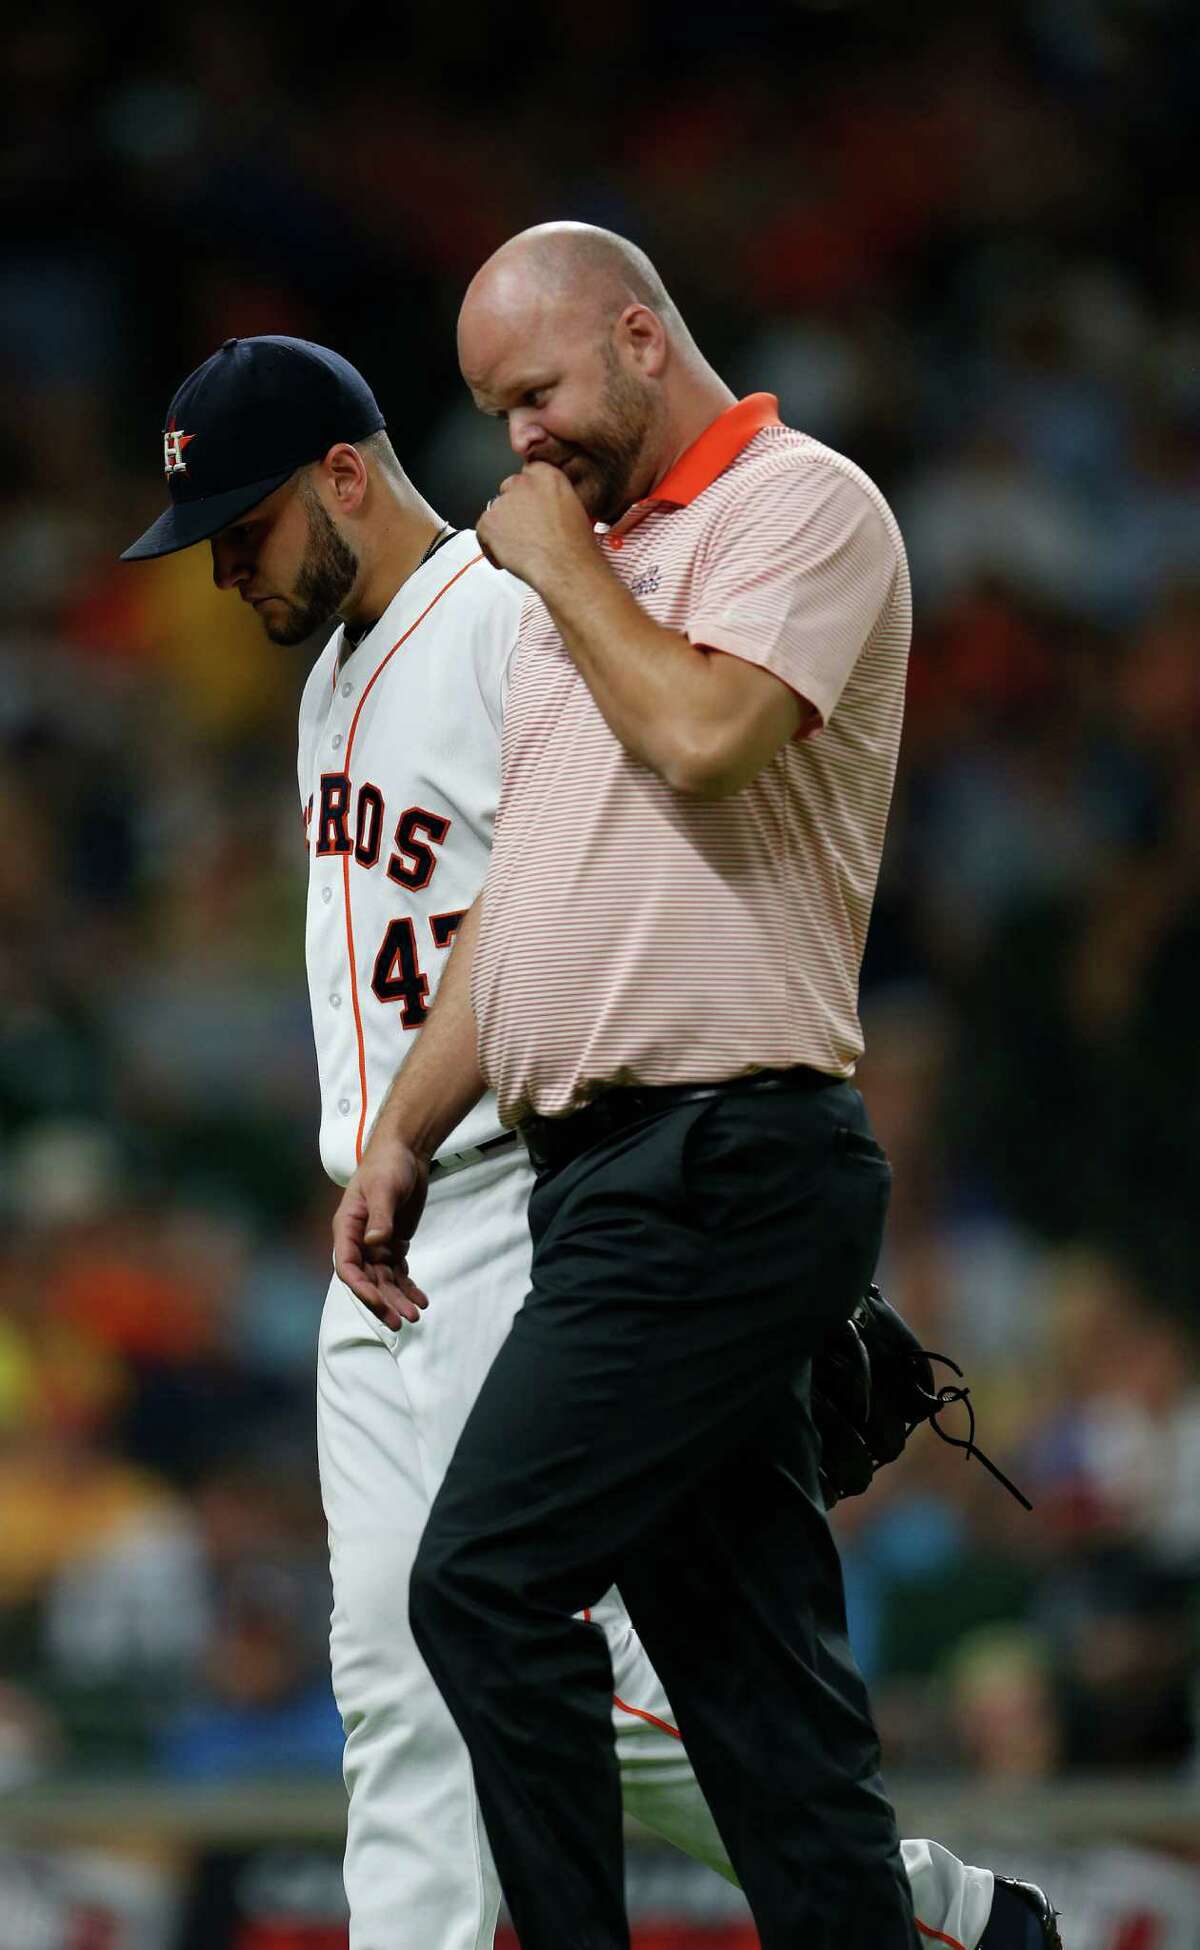 Houston Astros starting pitcher Lance McCullers (43) walks back to the dugout with trainer James Ready during the fifth inning of an MLB game at Minute Maid Park, Tuesday, Aug. 2, 2016, in Houston.